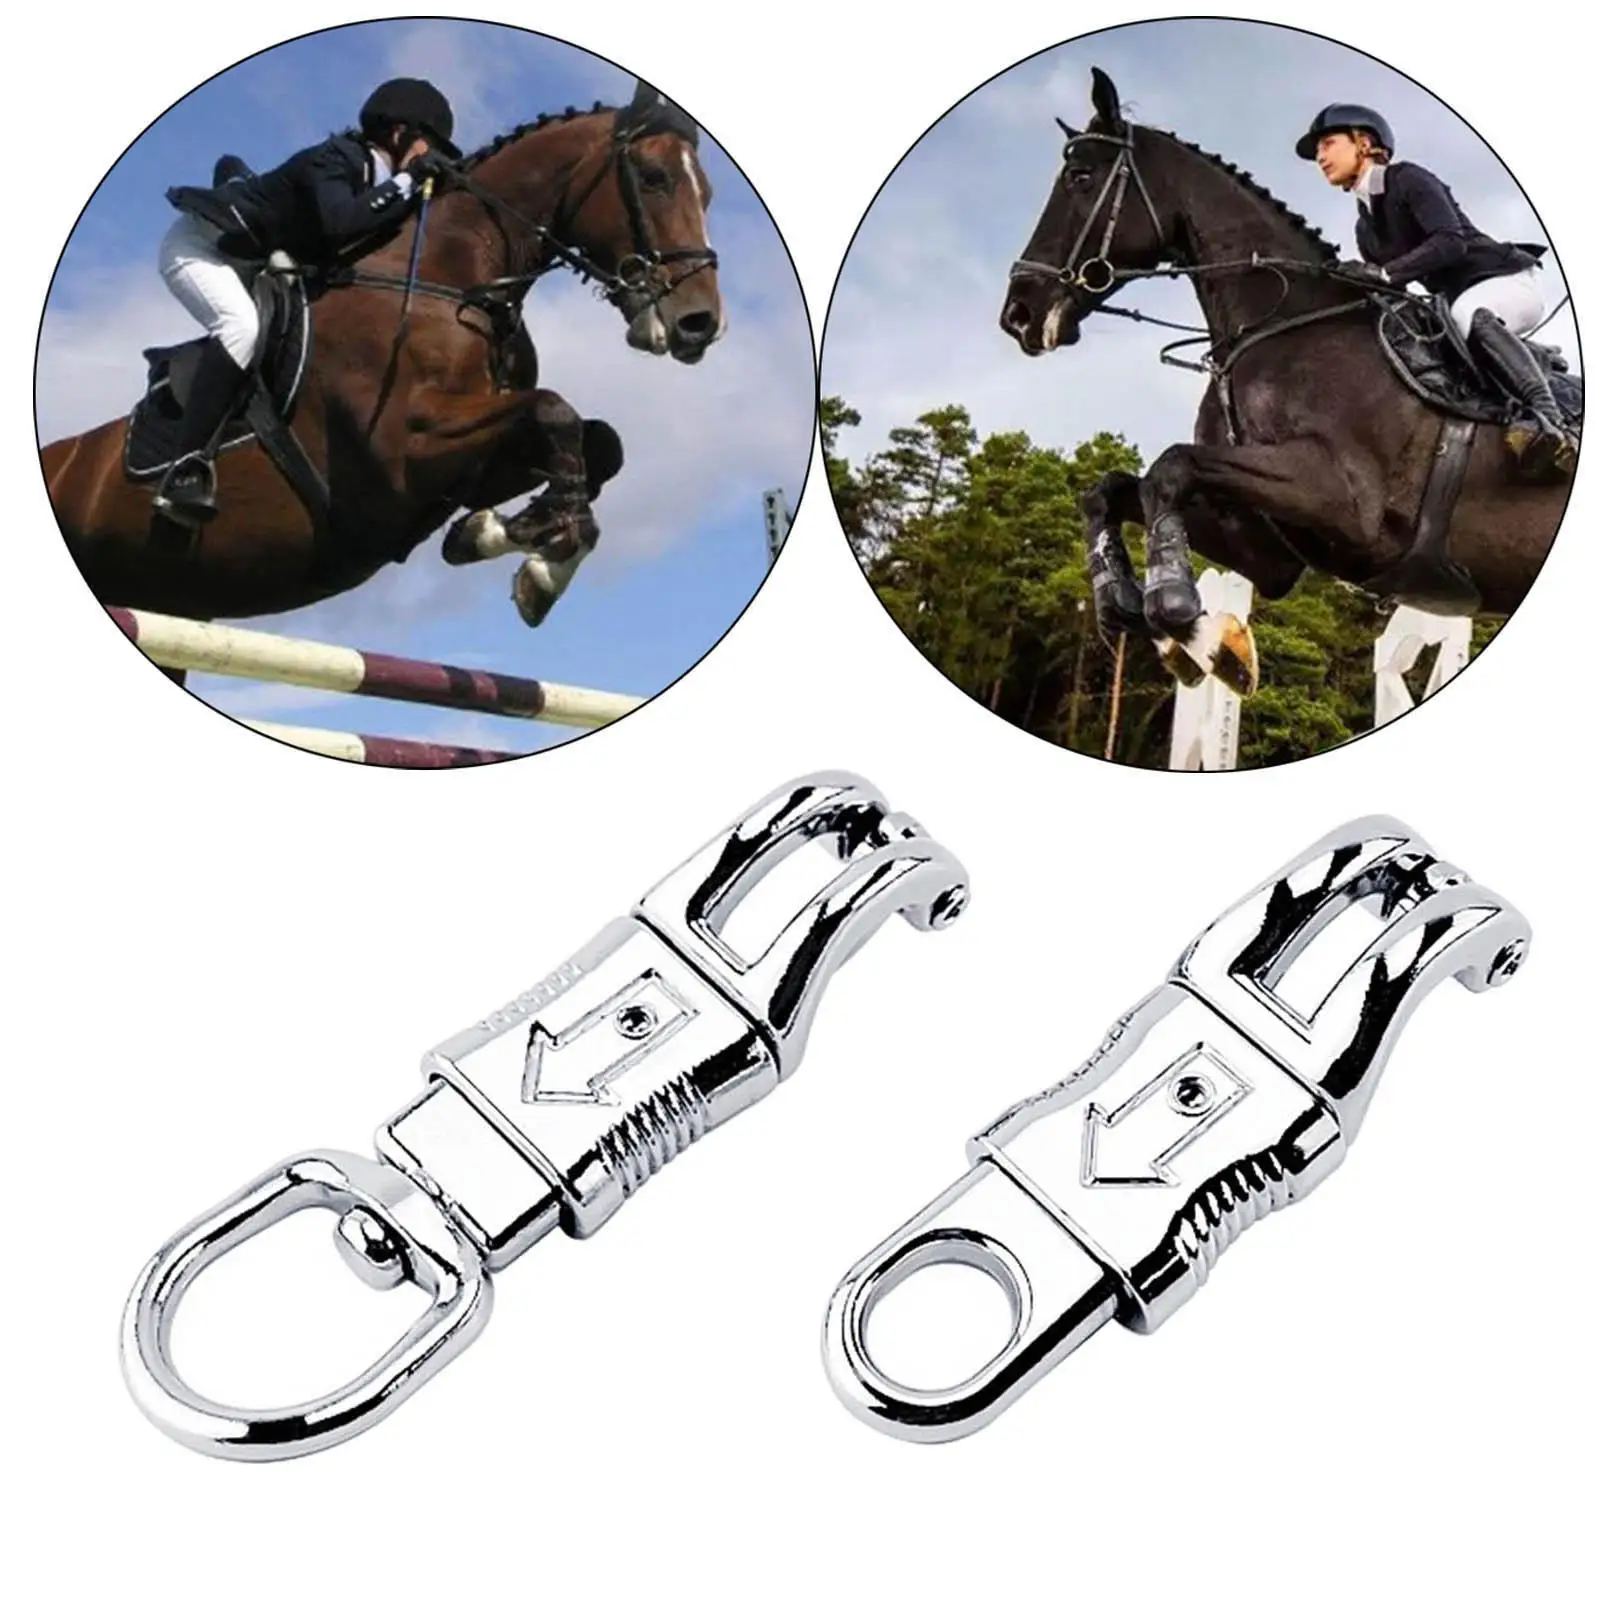 Panic Snaps Quick Release Buckles for Horse Riding Get Backs